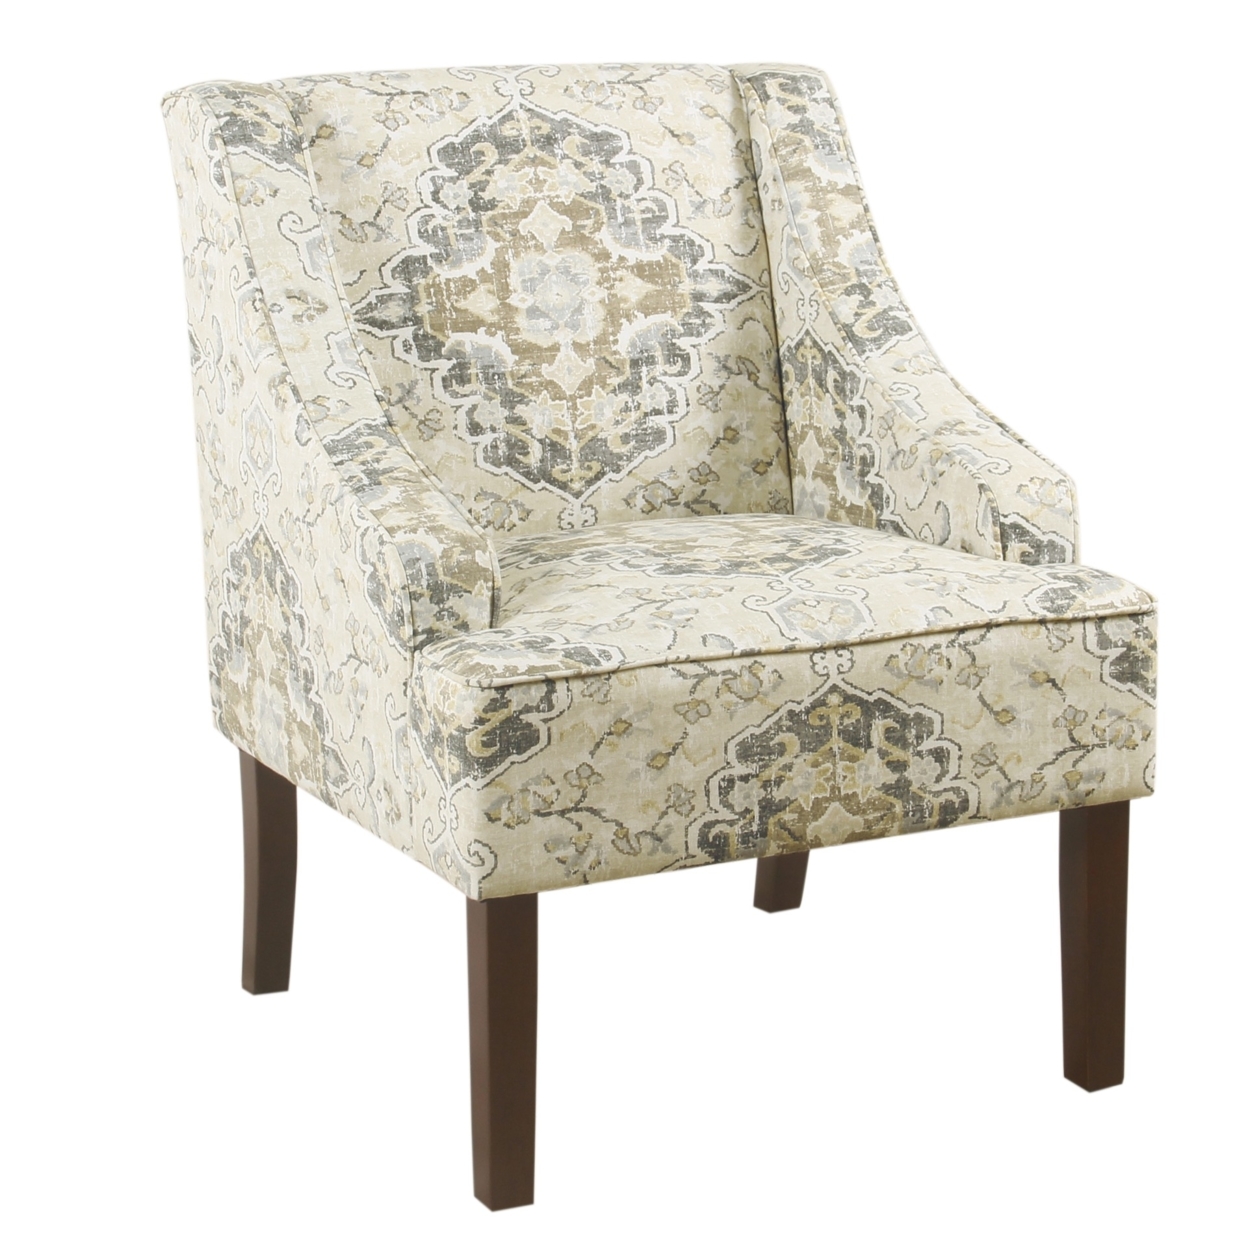 Fabric Upholstered Wooden Accent Chair With Swooping Armrests, Multicolor- Saltoro Sherpi